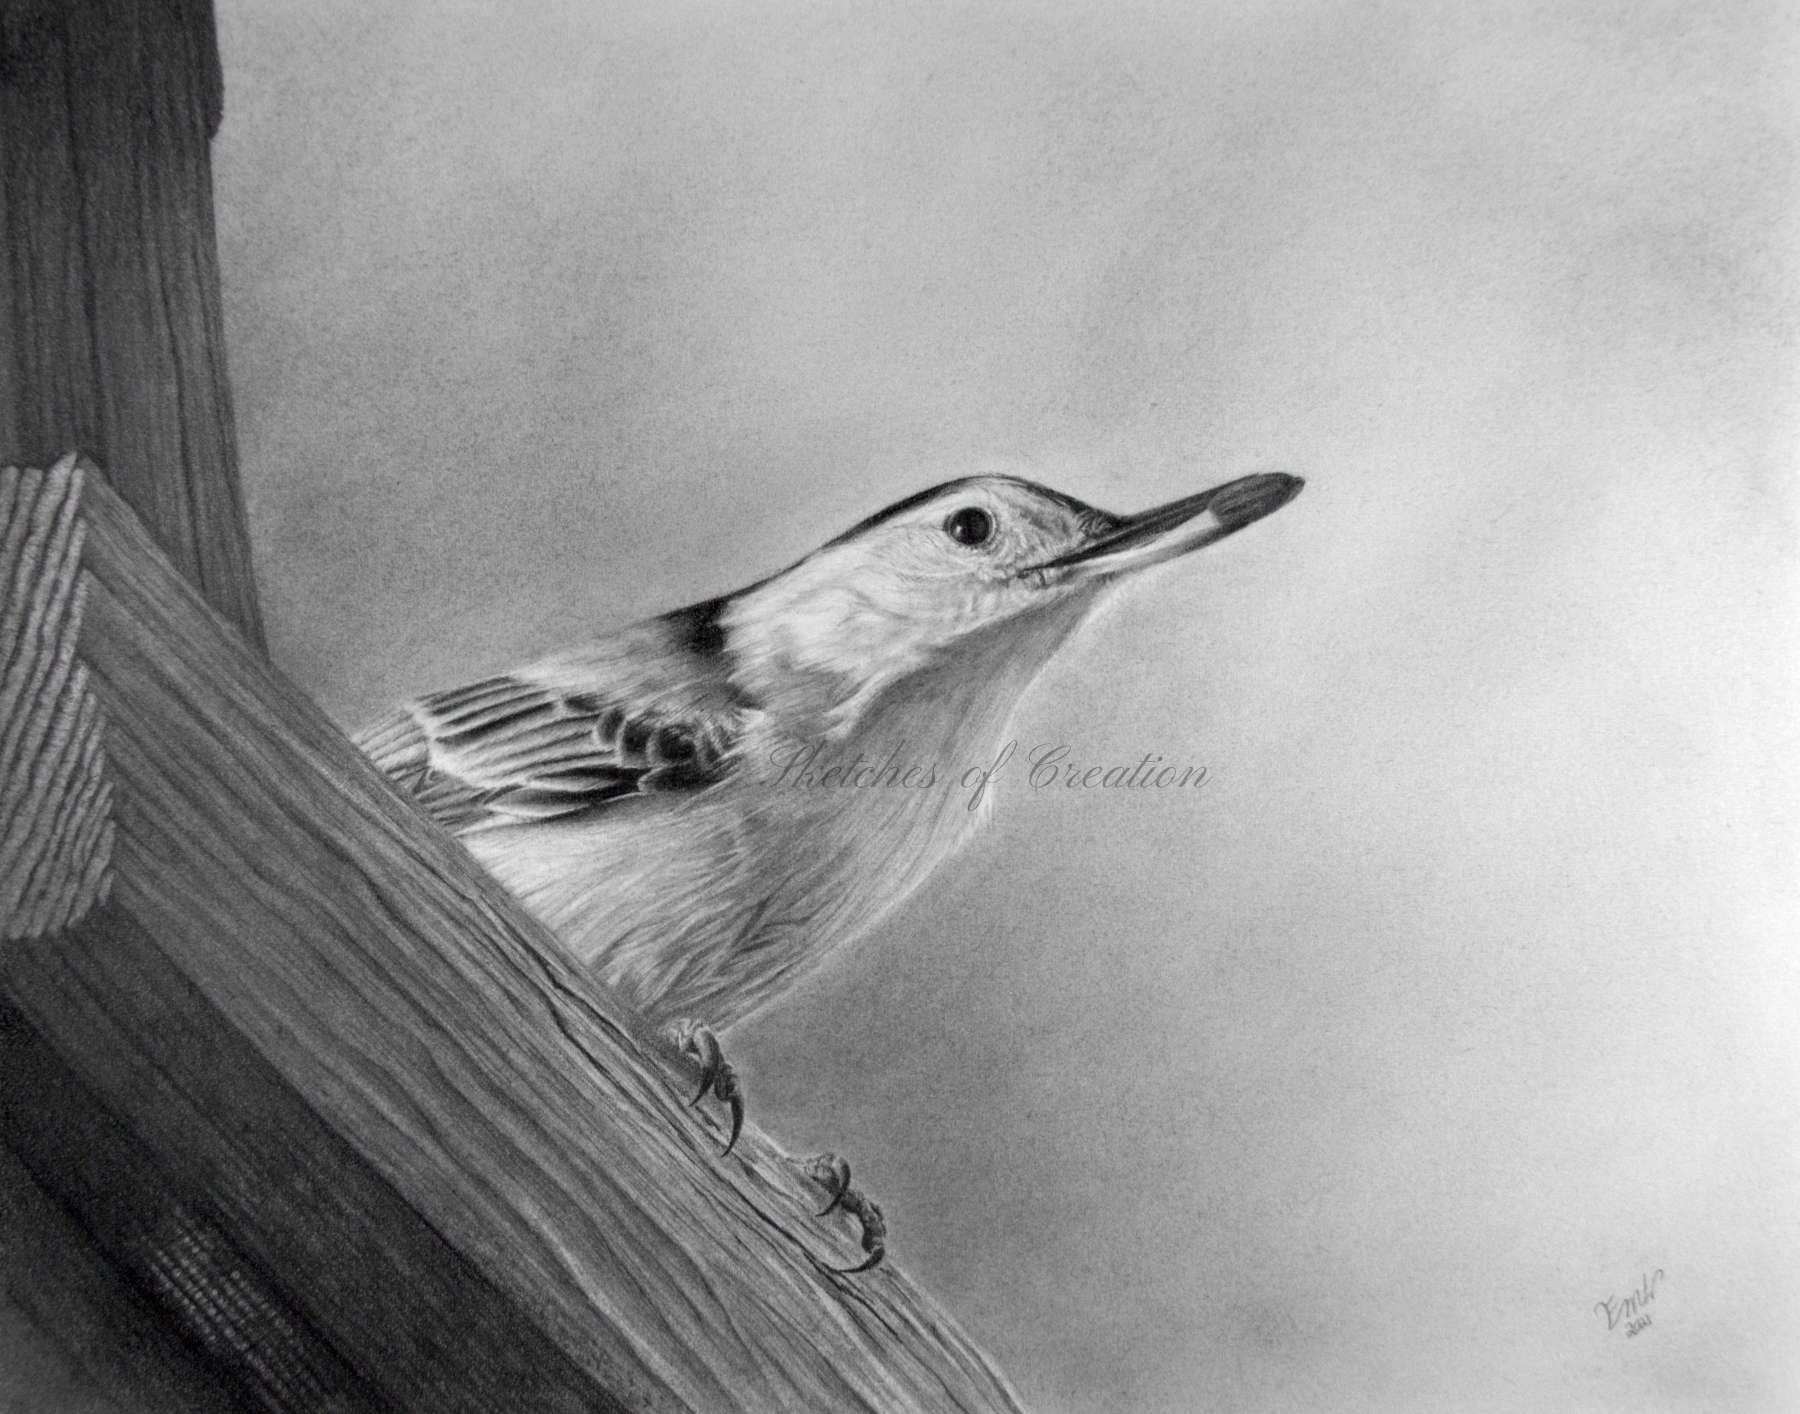 'Nuthatch' a drawing of a Nuthatch on a birdfeeder with a seed in his beak. approximately 8x10 inches plus deckled edge. Completed June 2021